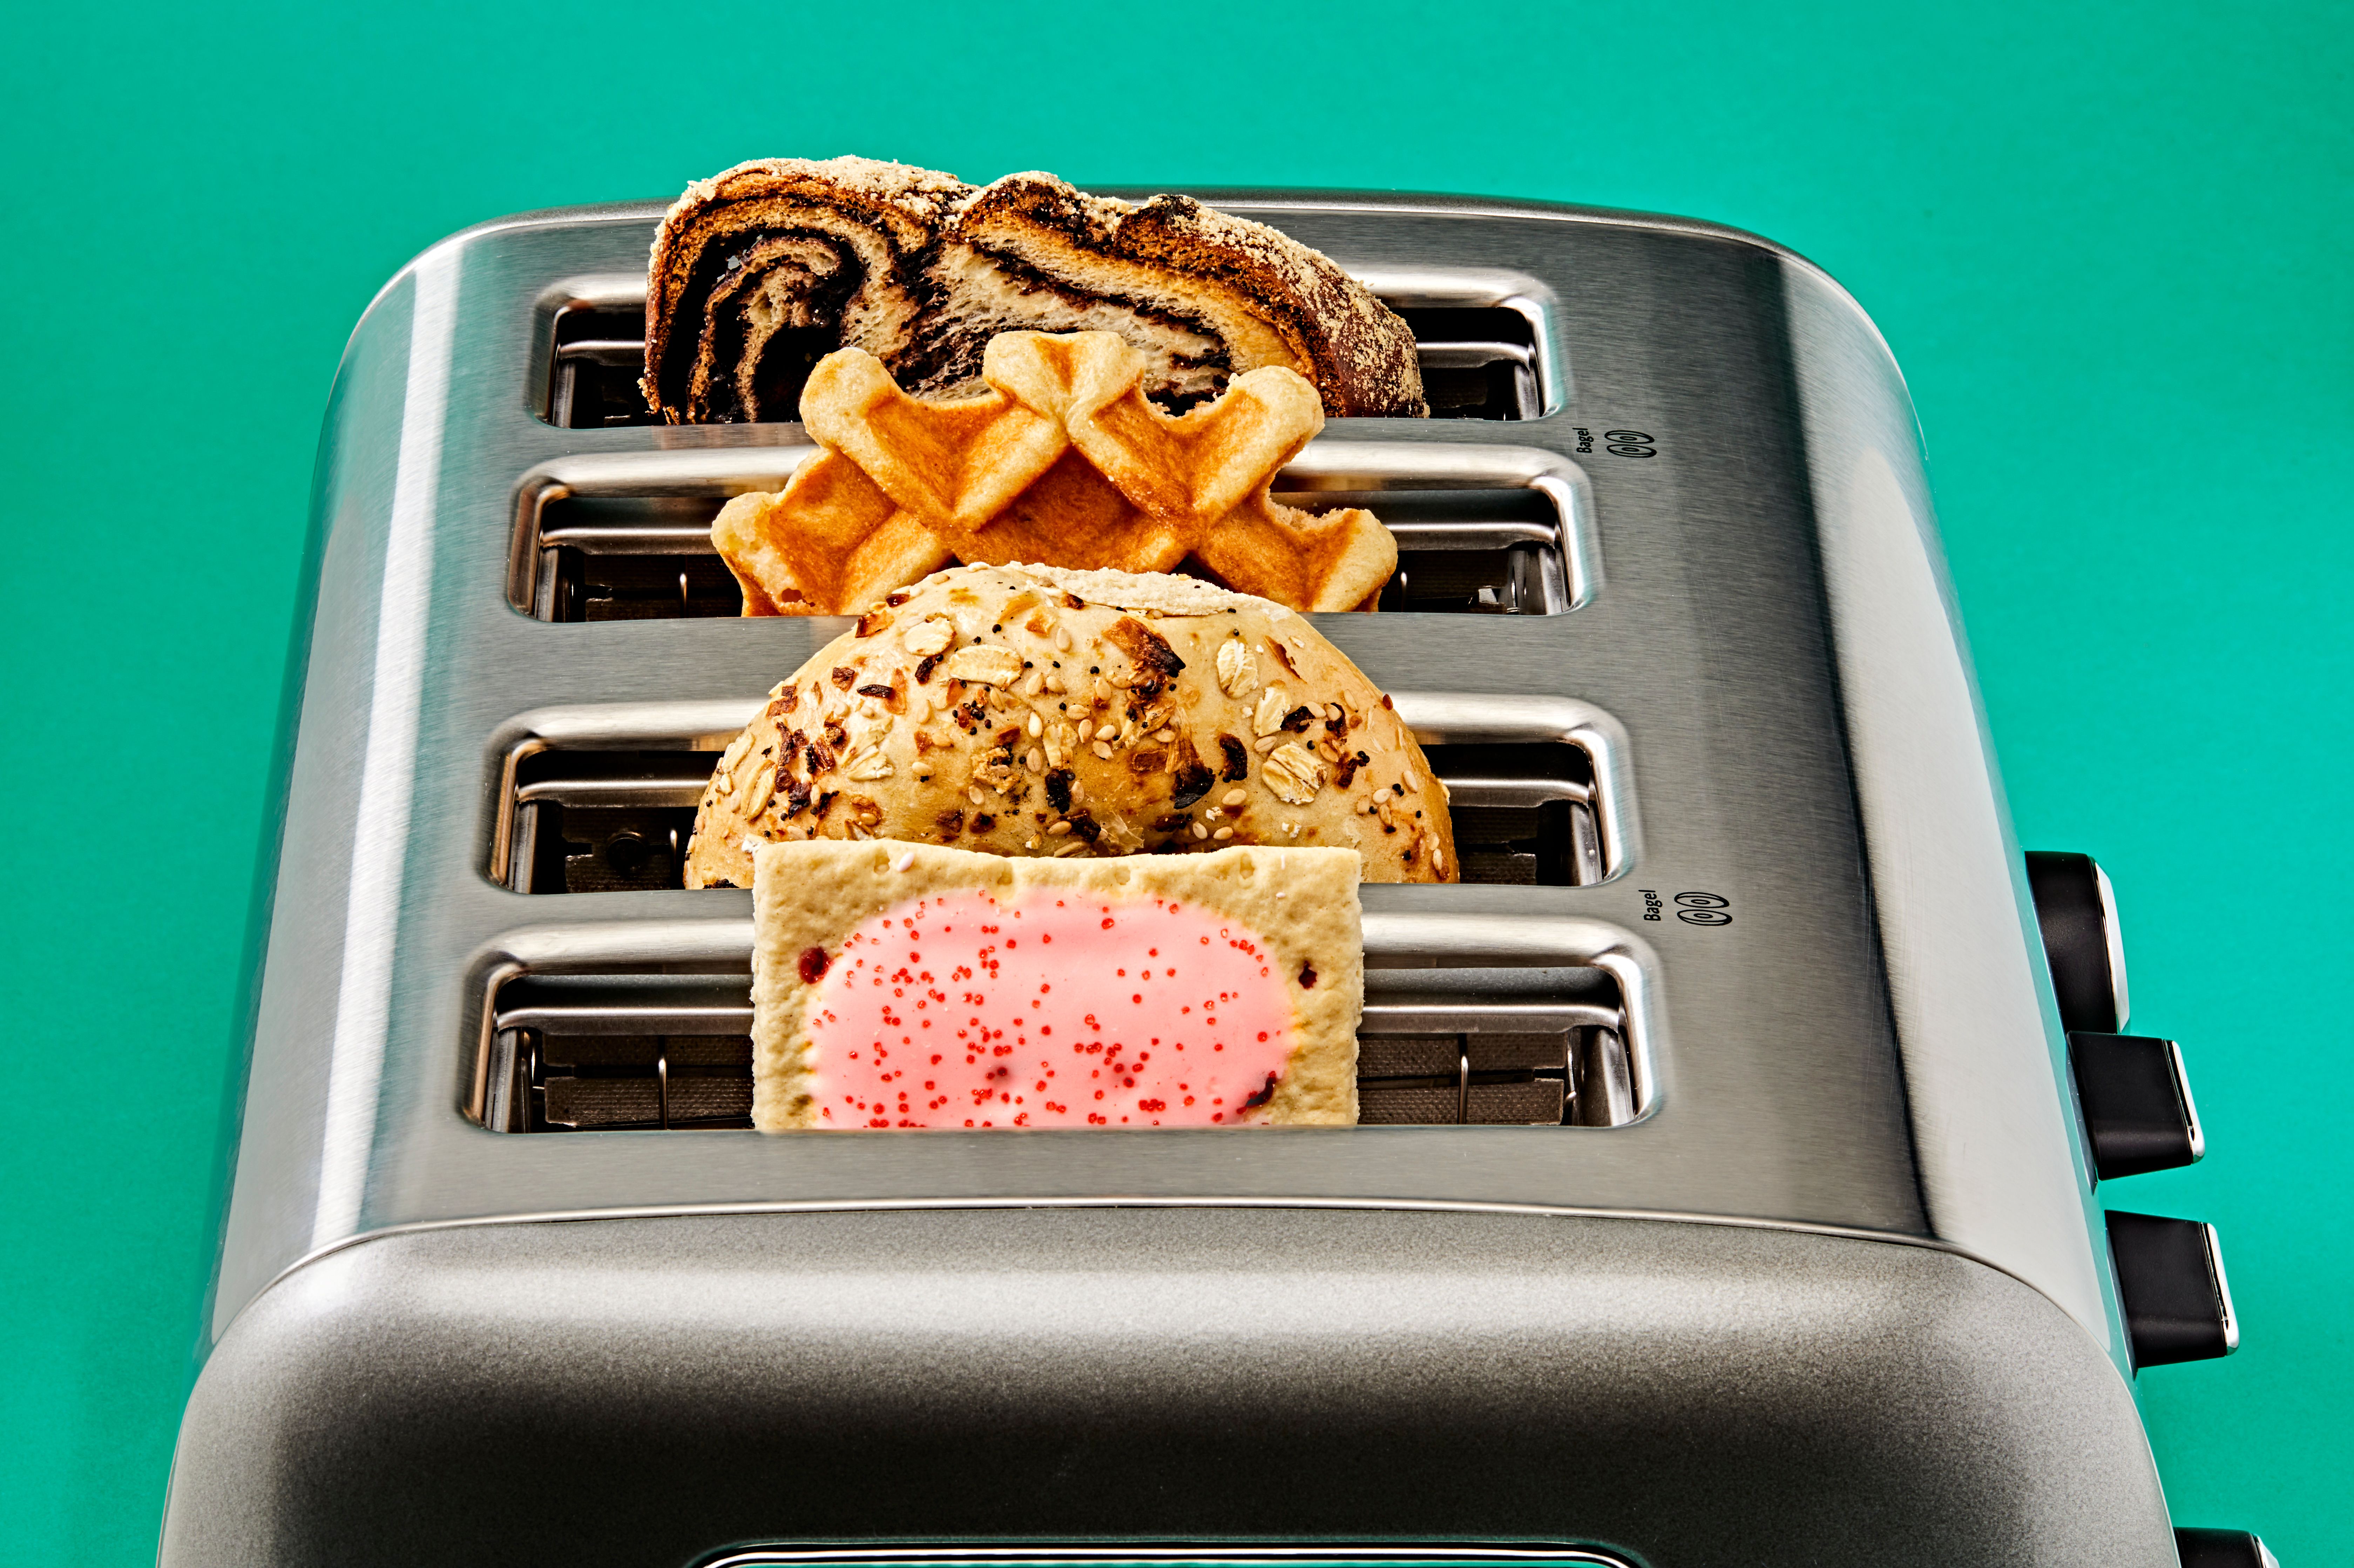 https://pyxis.nymag.com/v1/imgs/72f/1c0/2bd57754a1be1d35d0e3a6625a7dcb0556-toaster-stack-final.jpg